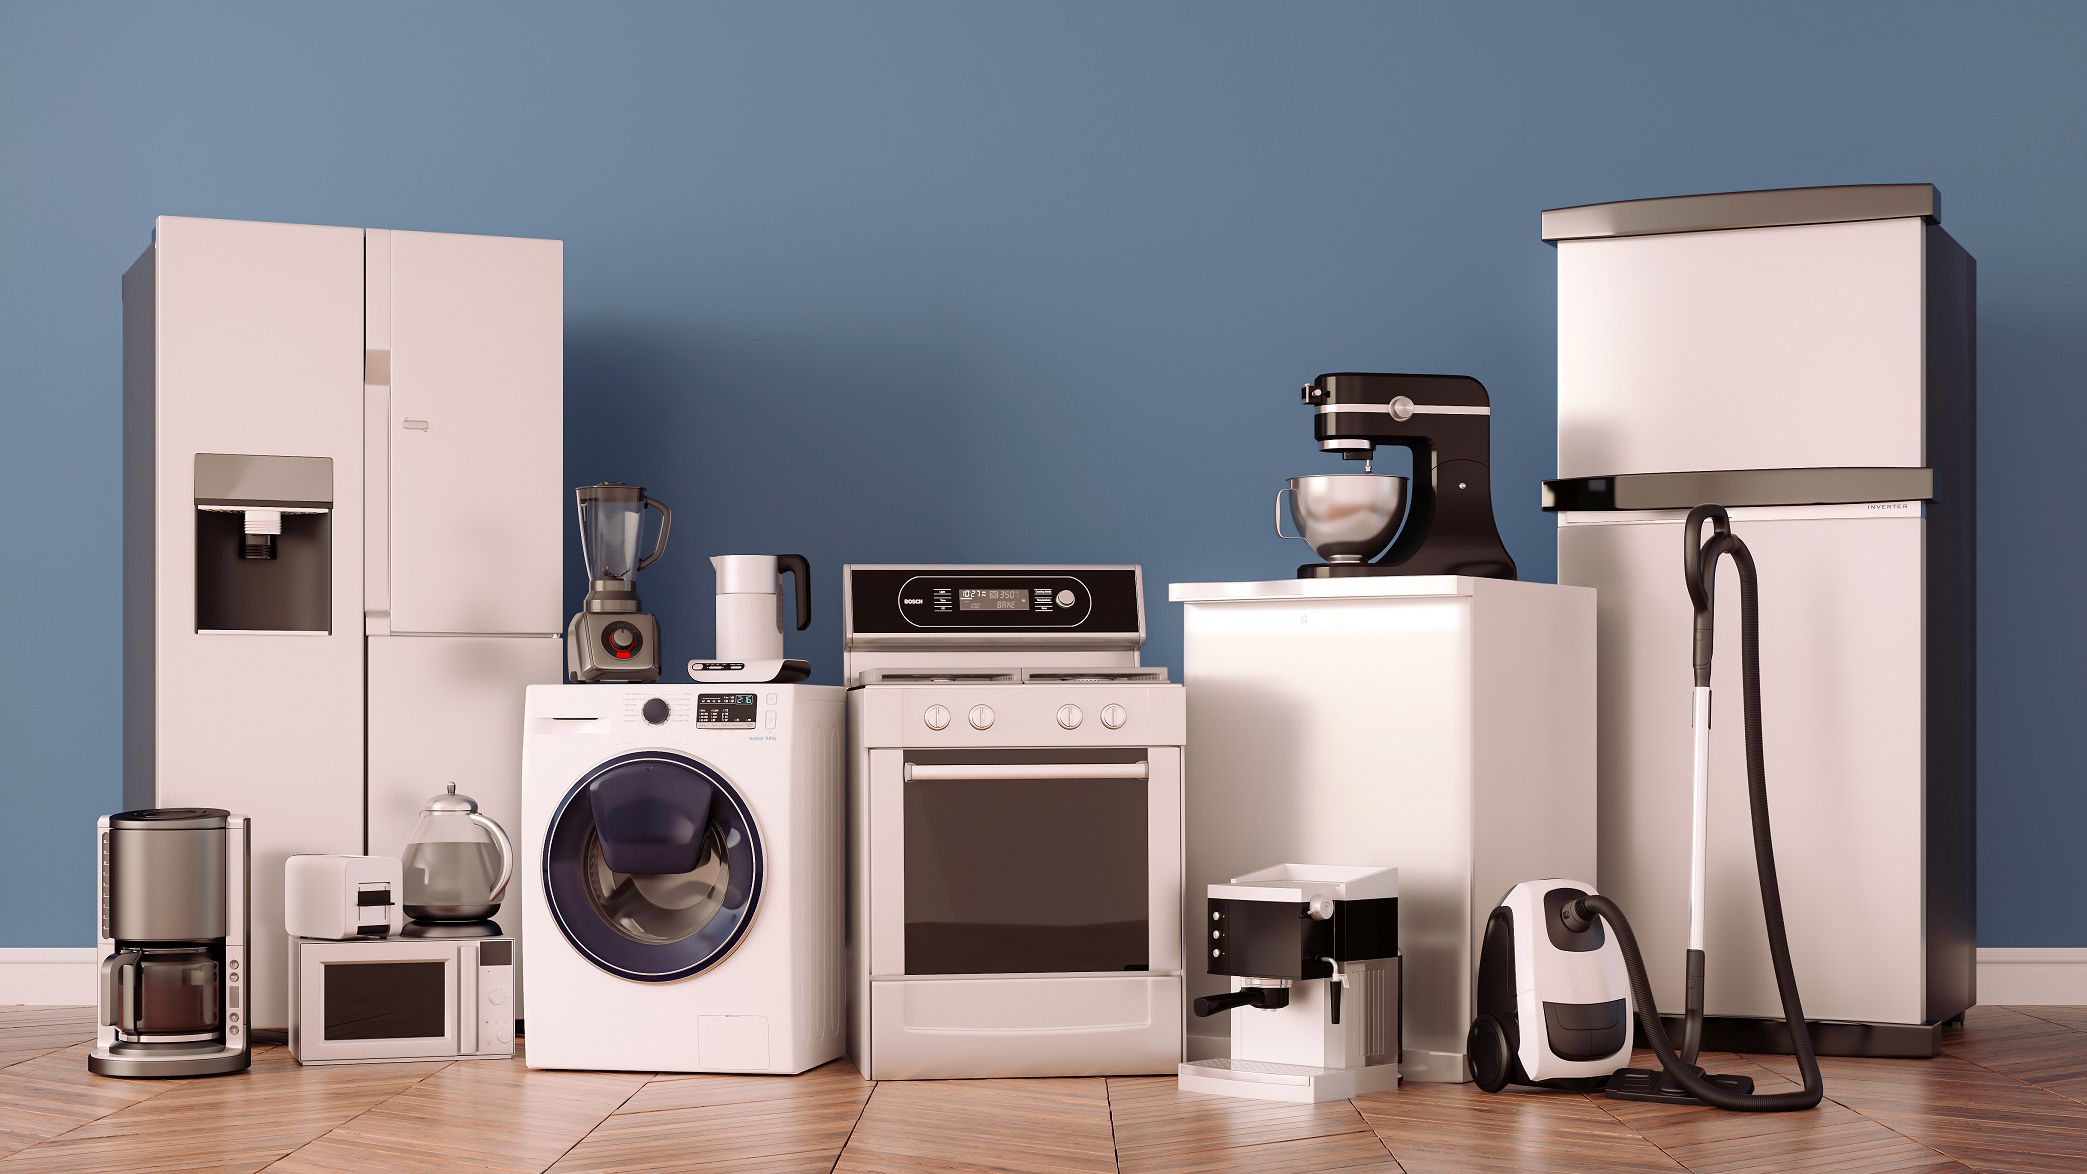 A selection of major and small kitchen appliances including a fridge, washing machine, vacuum and mixer